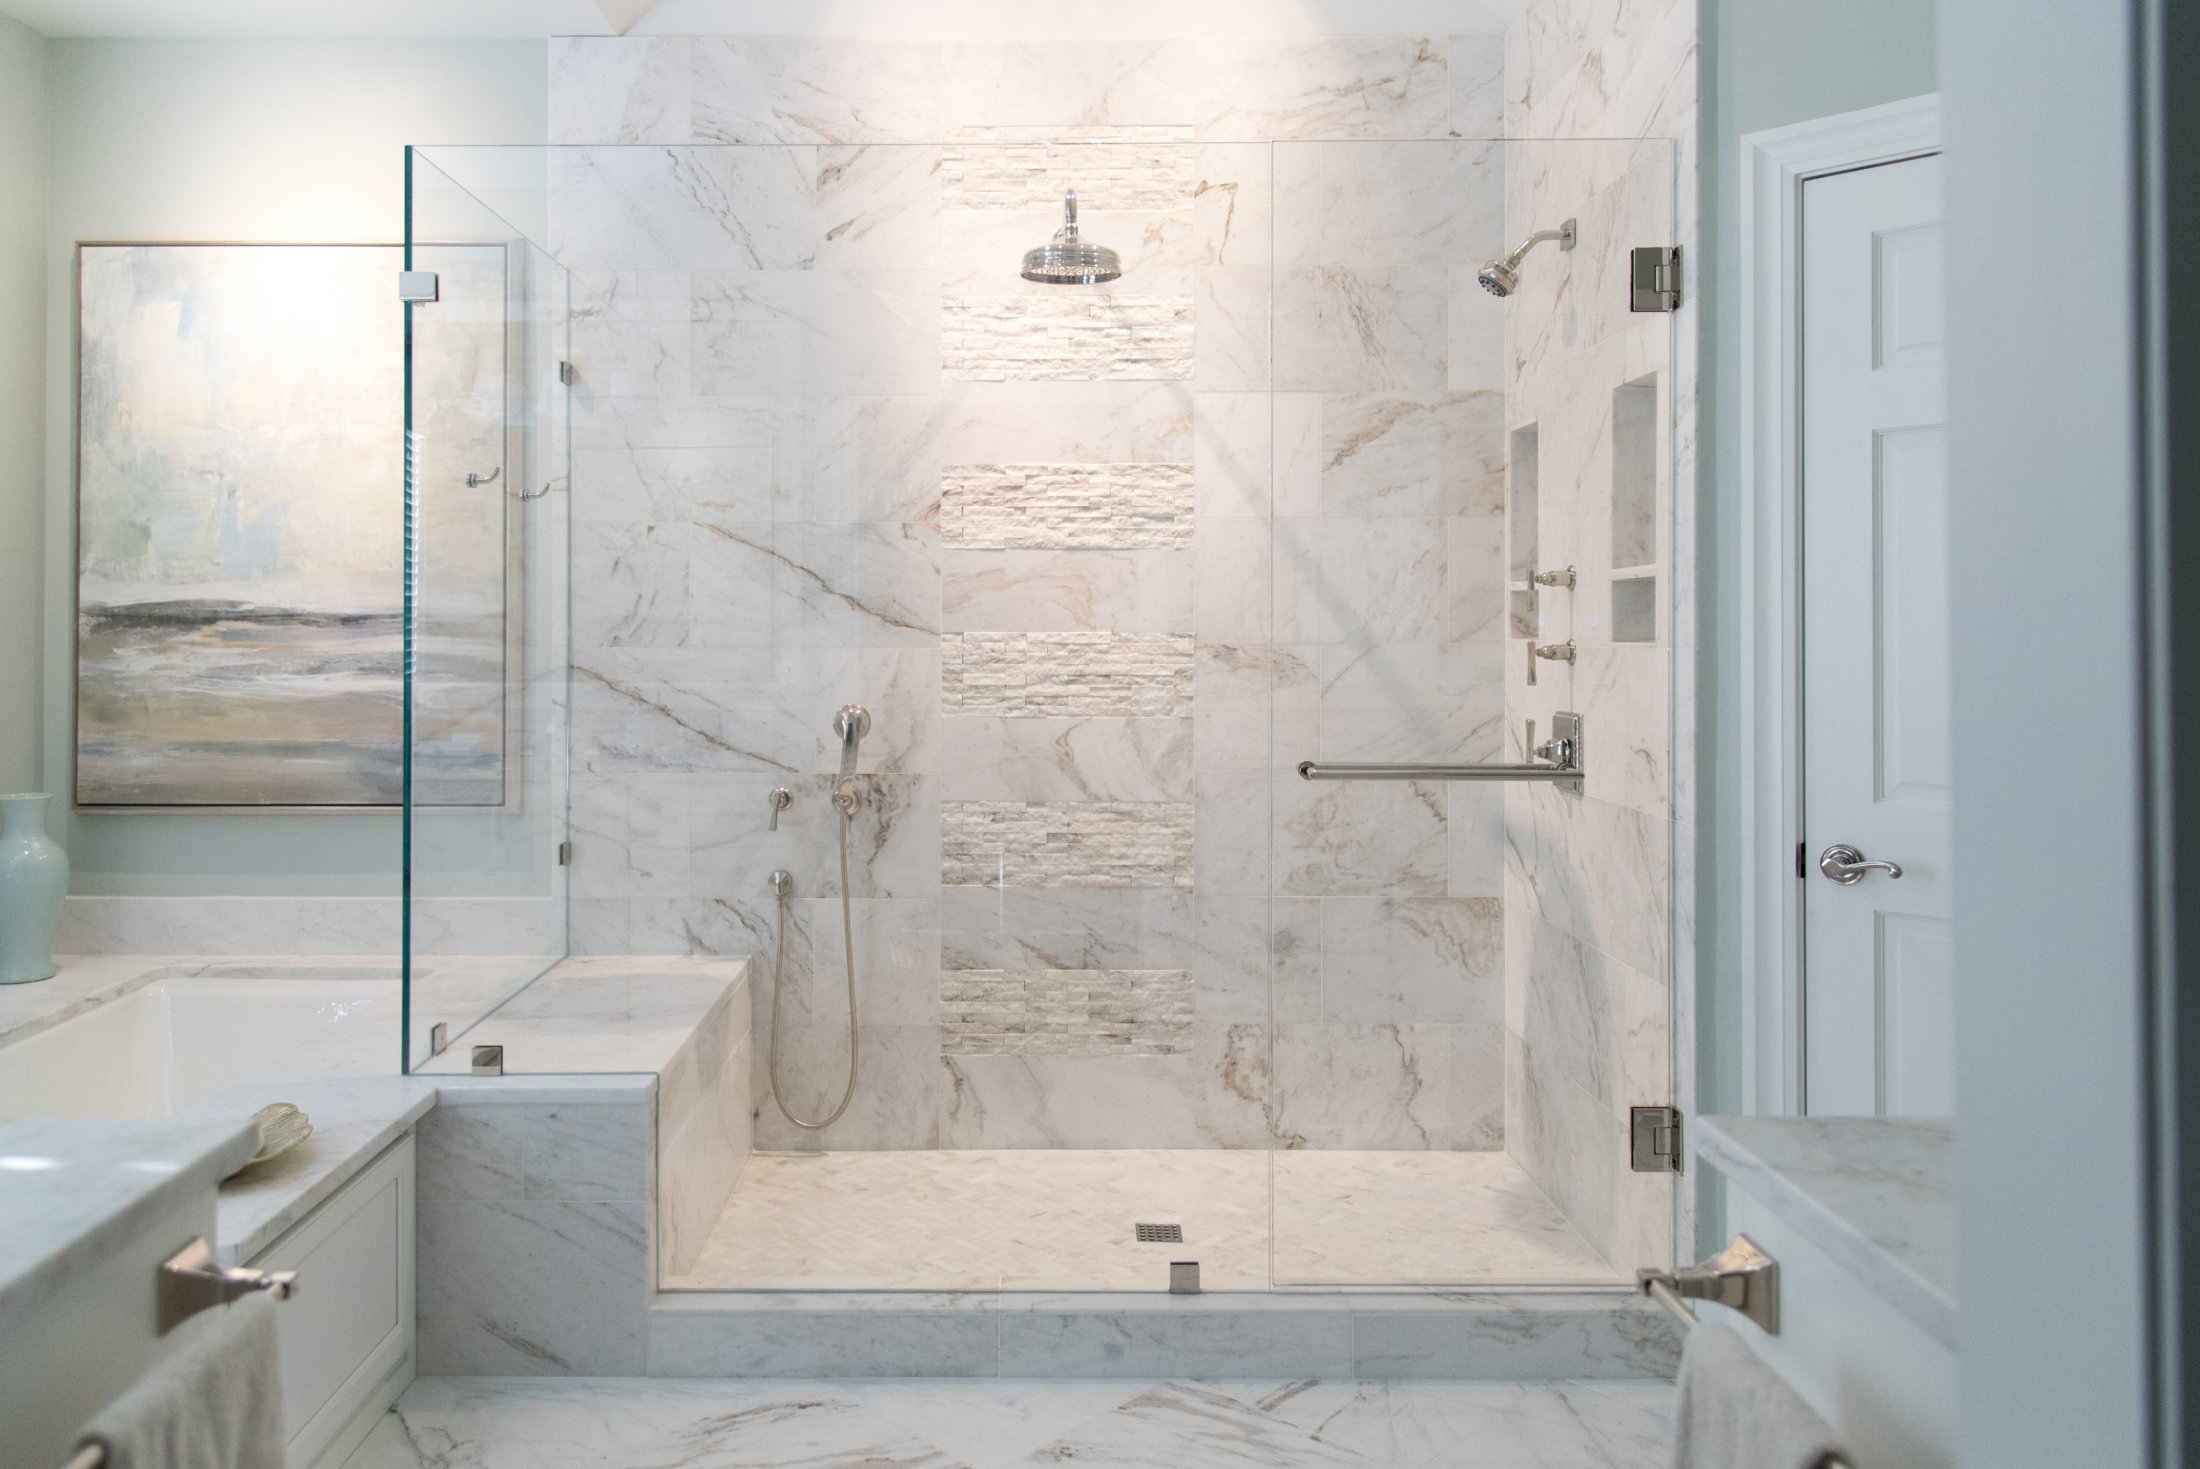 Large seamless shower with nickel hardware and a traditional swinging door.